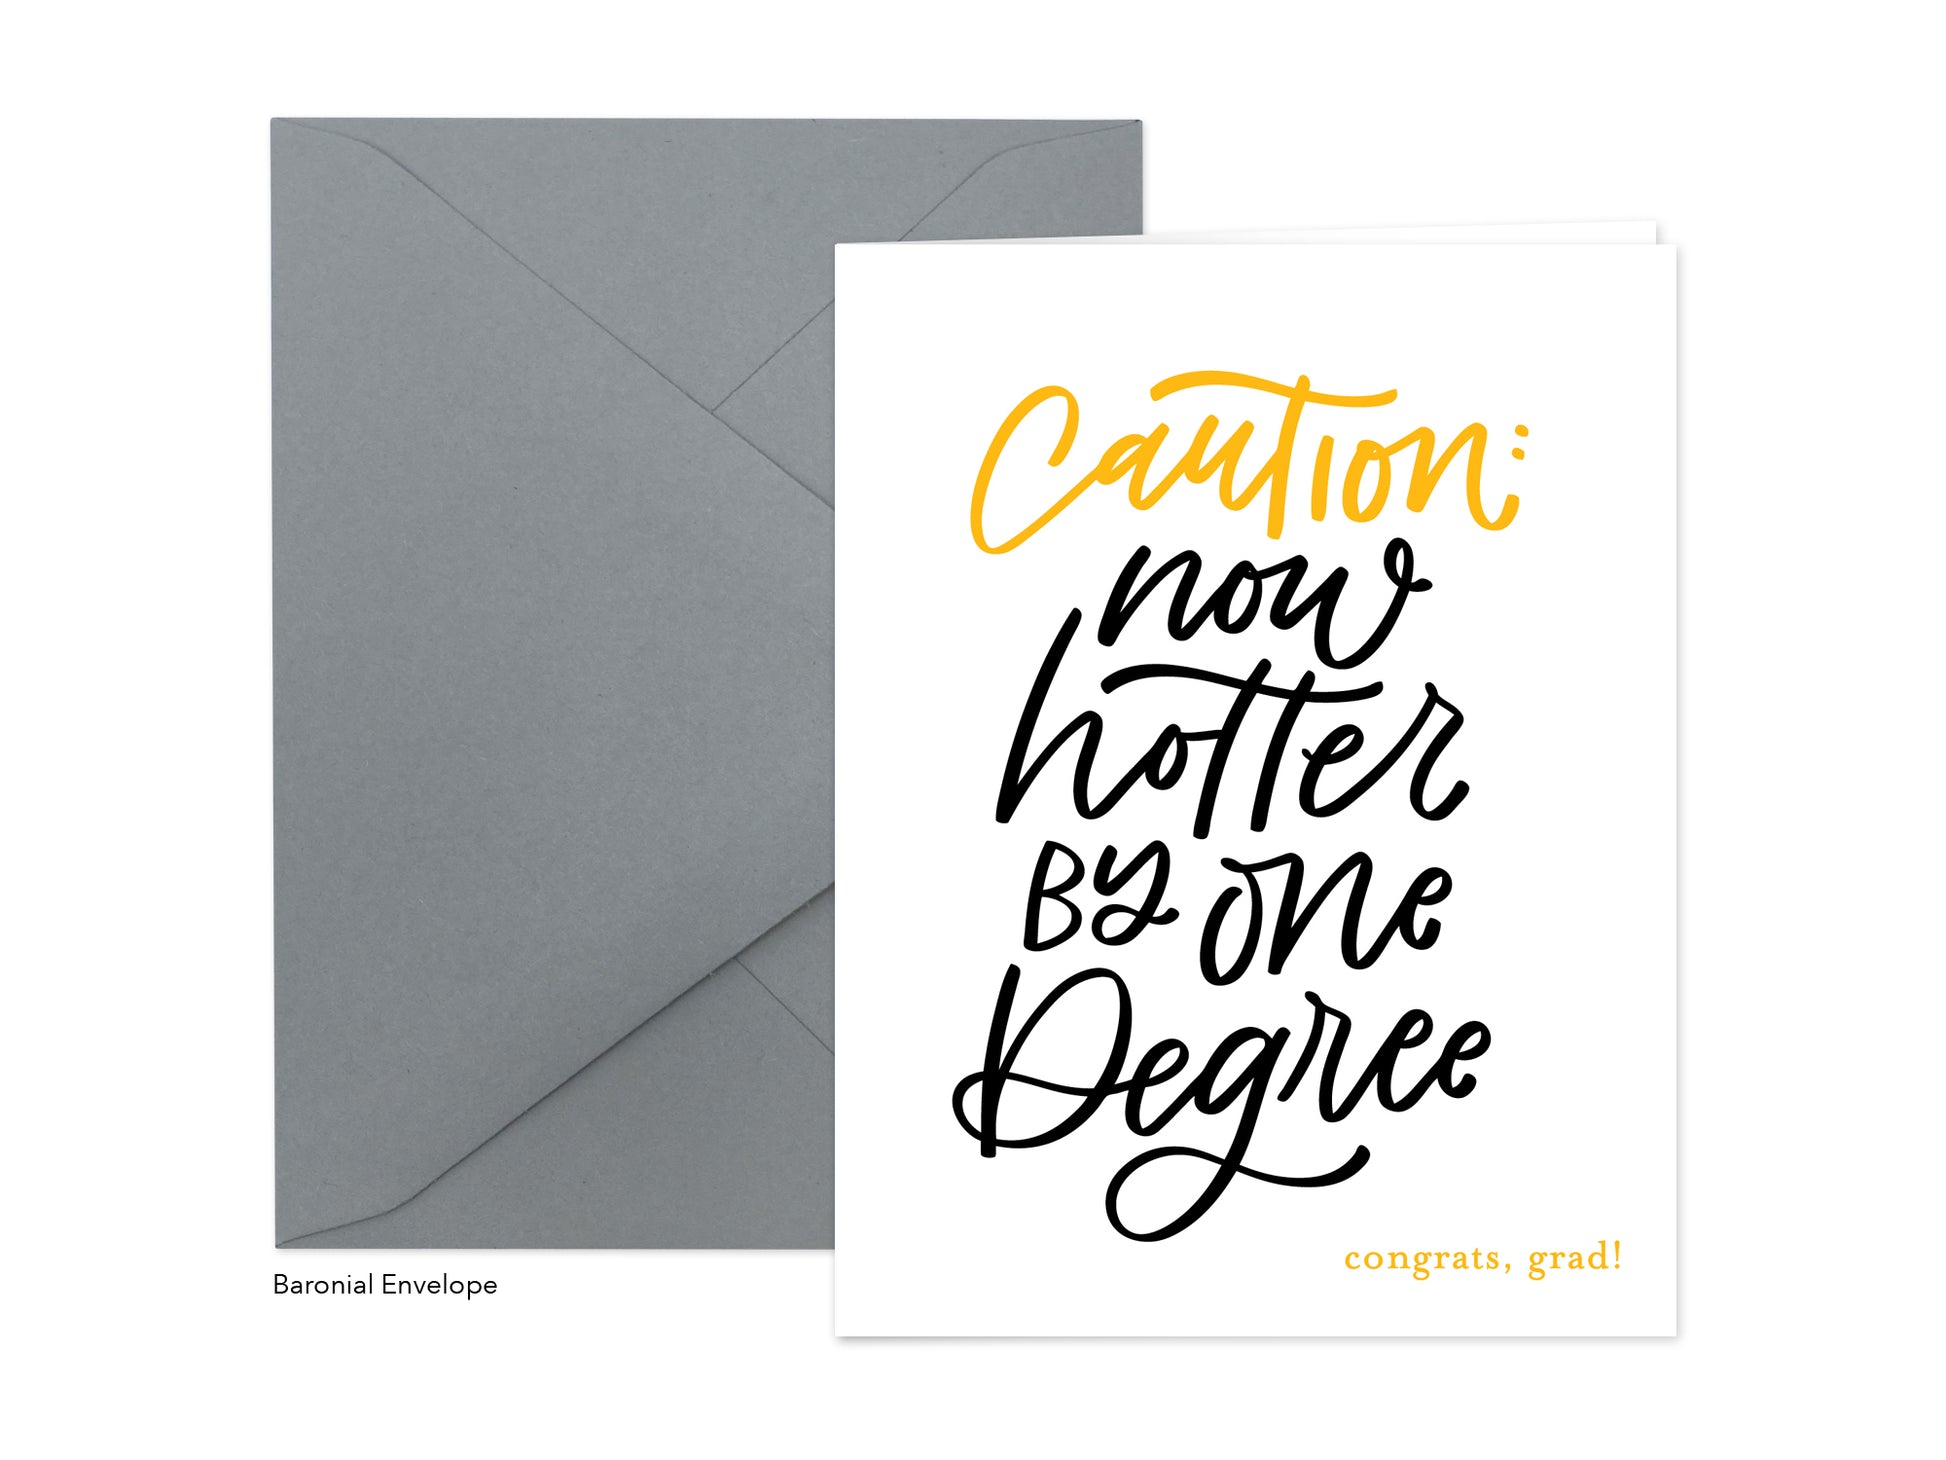 NOW HOTTER GRAD GREETING CARD.